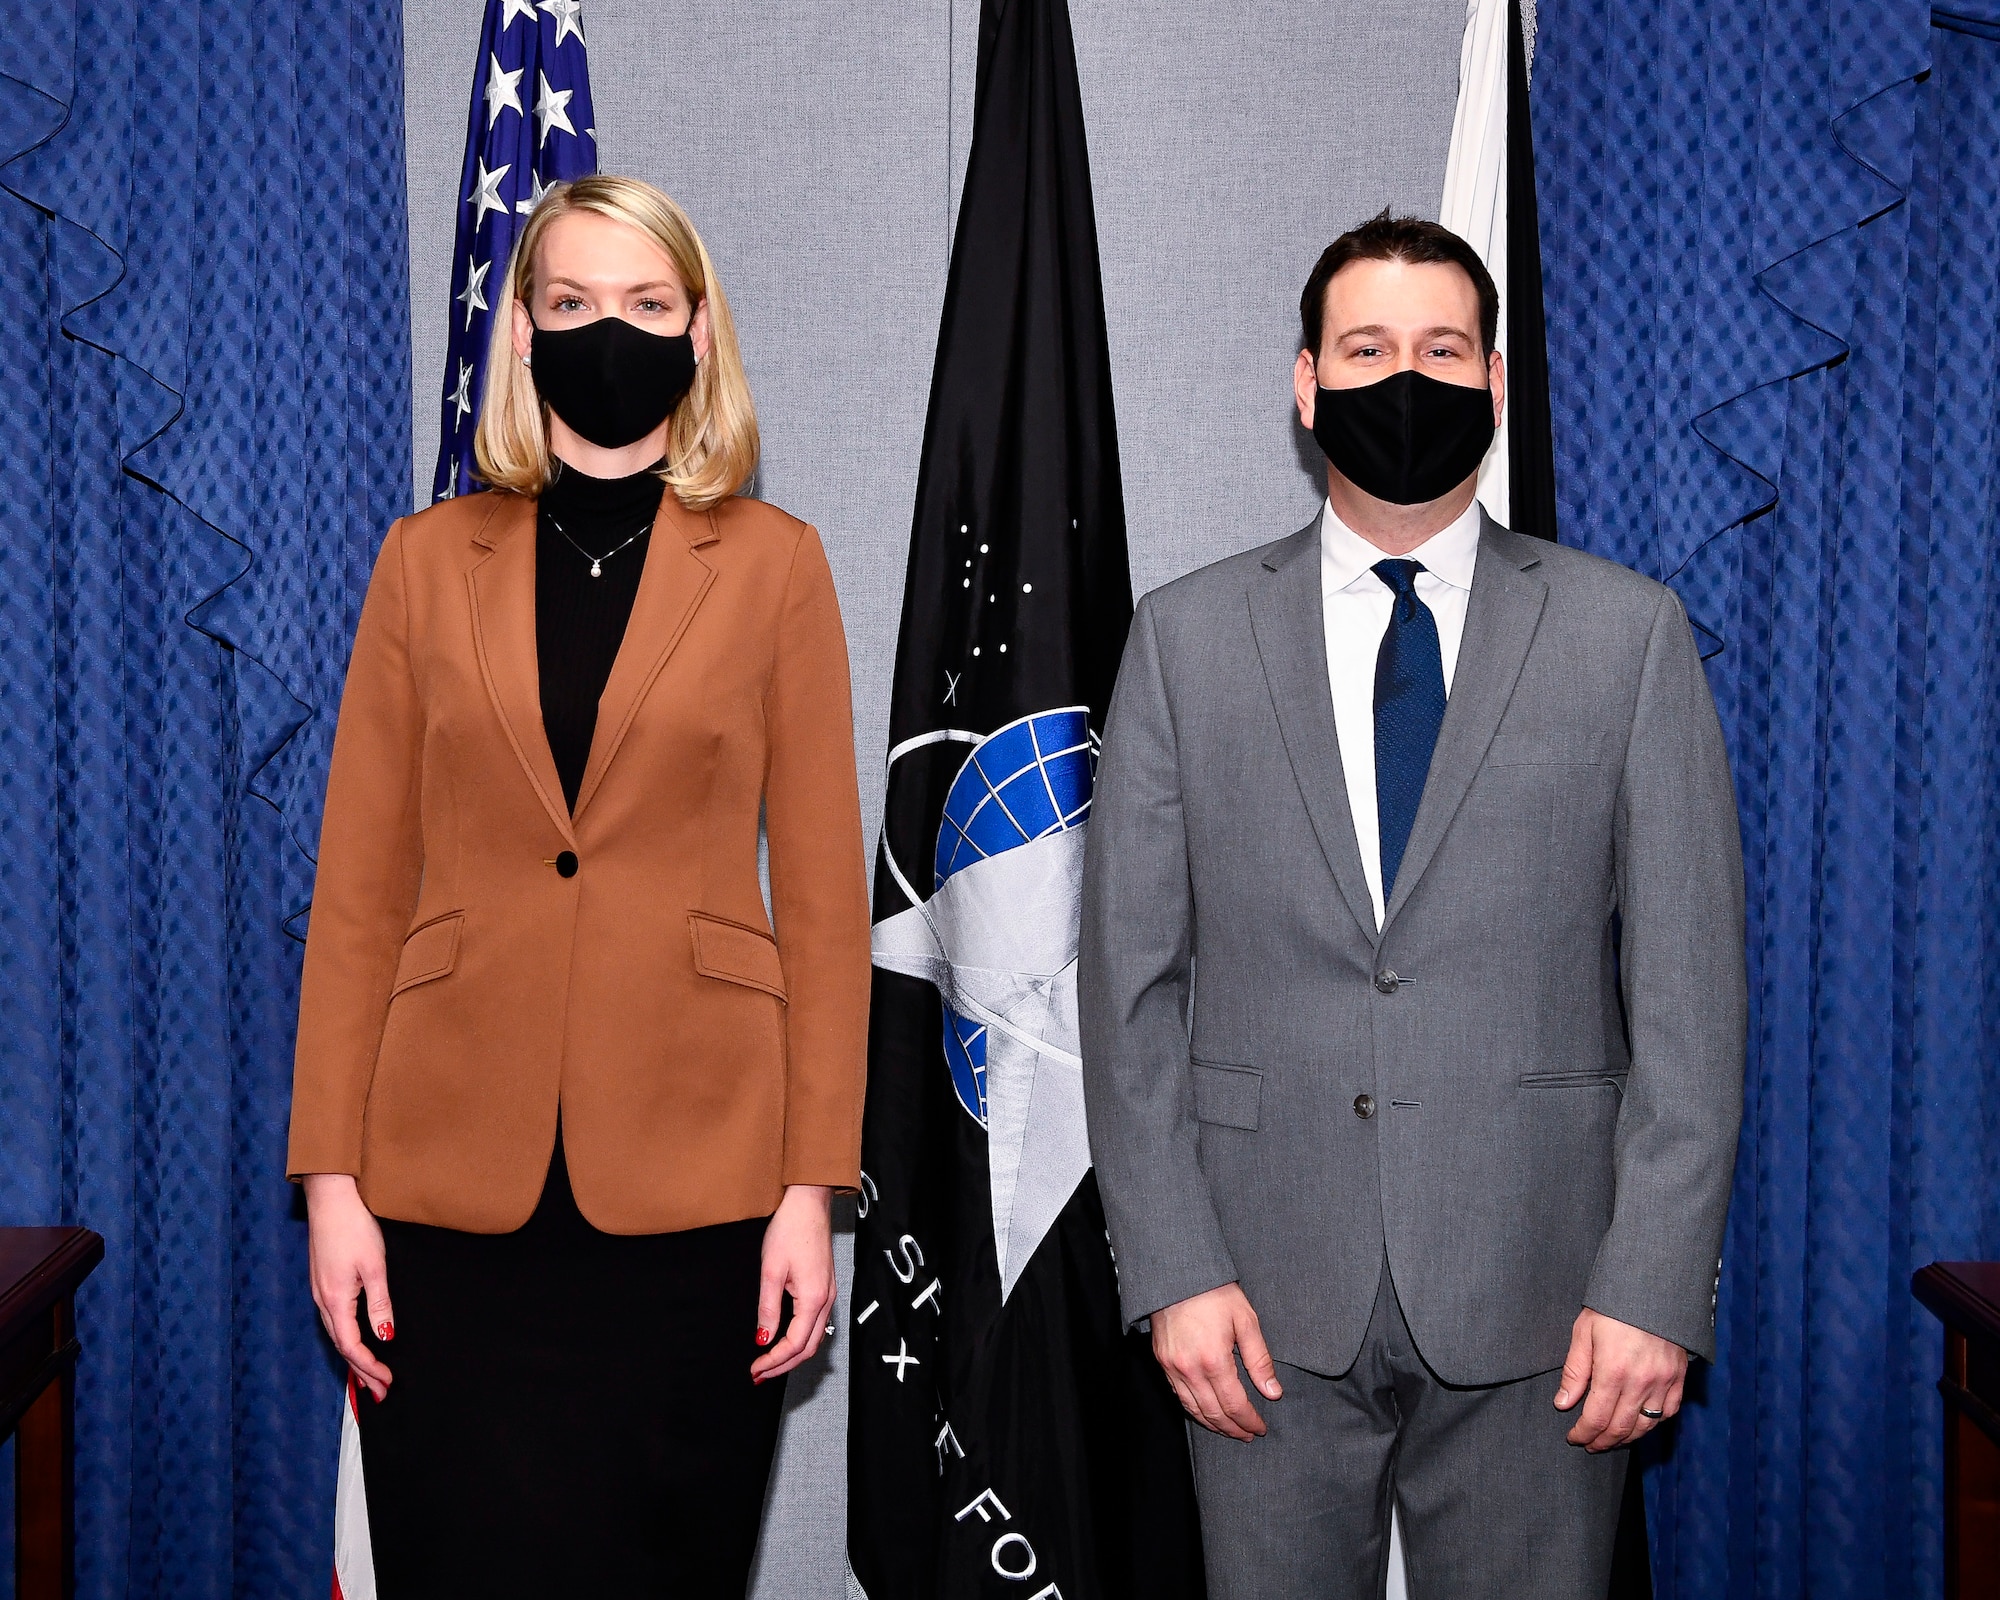 Alison Wargo, left, an illustrator with the Institute of Heraldry, and division chief Andrew Wilson pose before a ceremony at the Pentagon unveiling the U.S. Space Force Space Staff Badge, Arlington, Va., Dec. 11, 2020. Service members assigned to Space Force at the Pentagon will wear the badge.